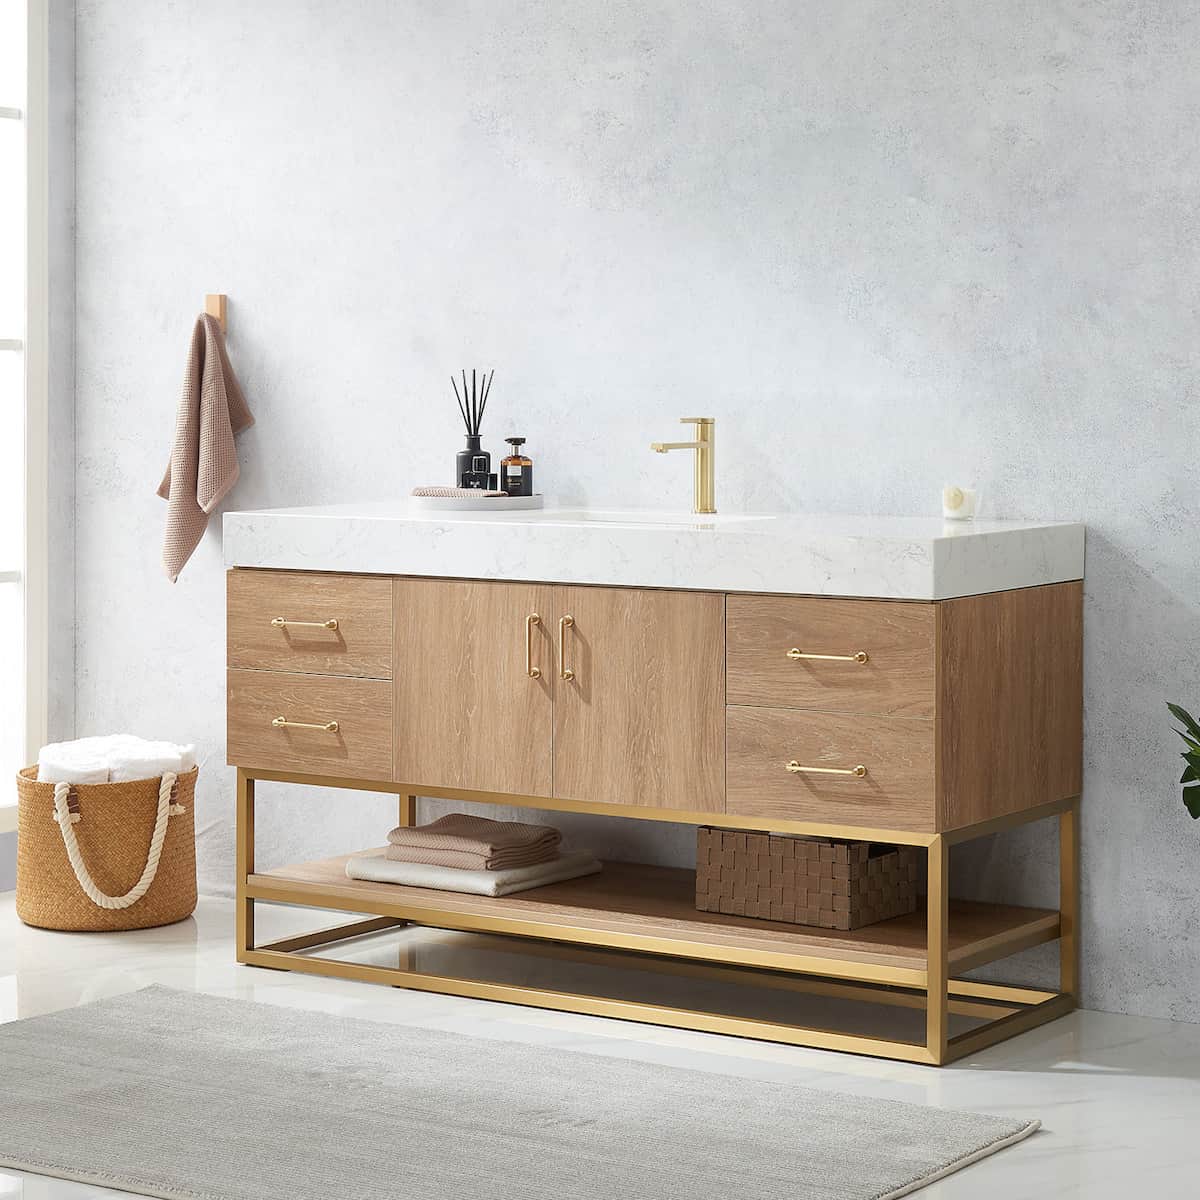 Vinnova Alistair 60 Inch Freestanding Single Vanity in North American Oak and Brushed Gold Frame with White Grain Stone Countertop Without Mirror Side 789060S-NO-GW-NM